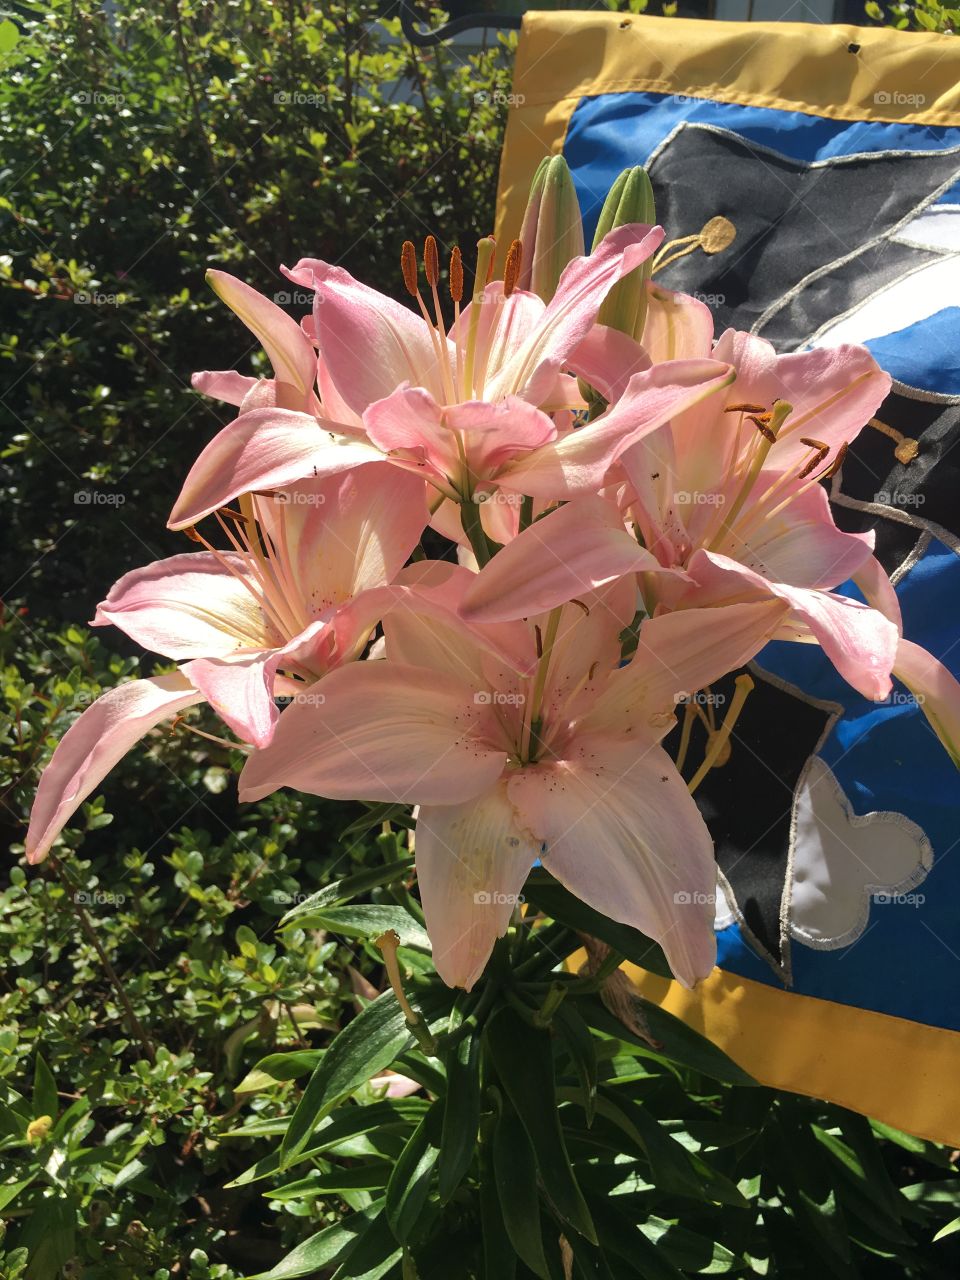 A cluster of lilies bloom in the park